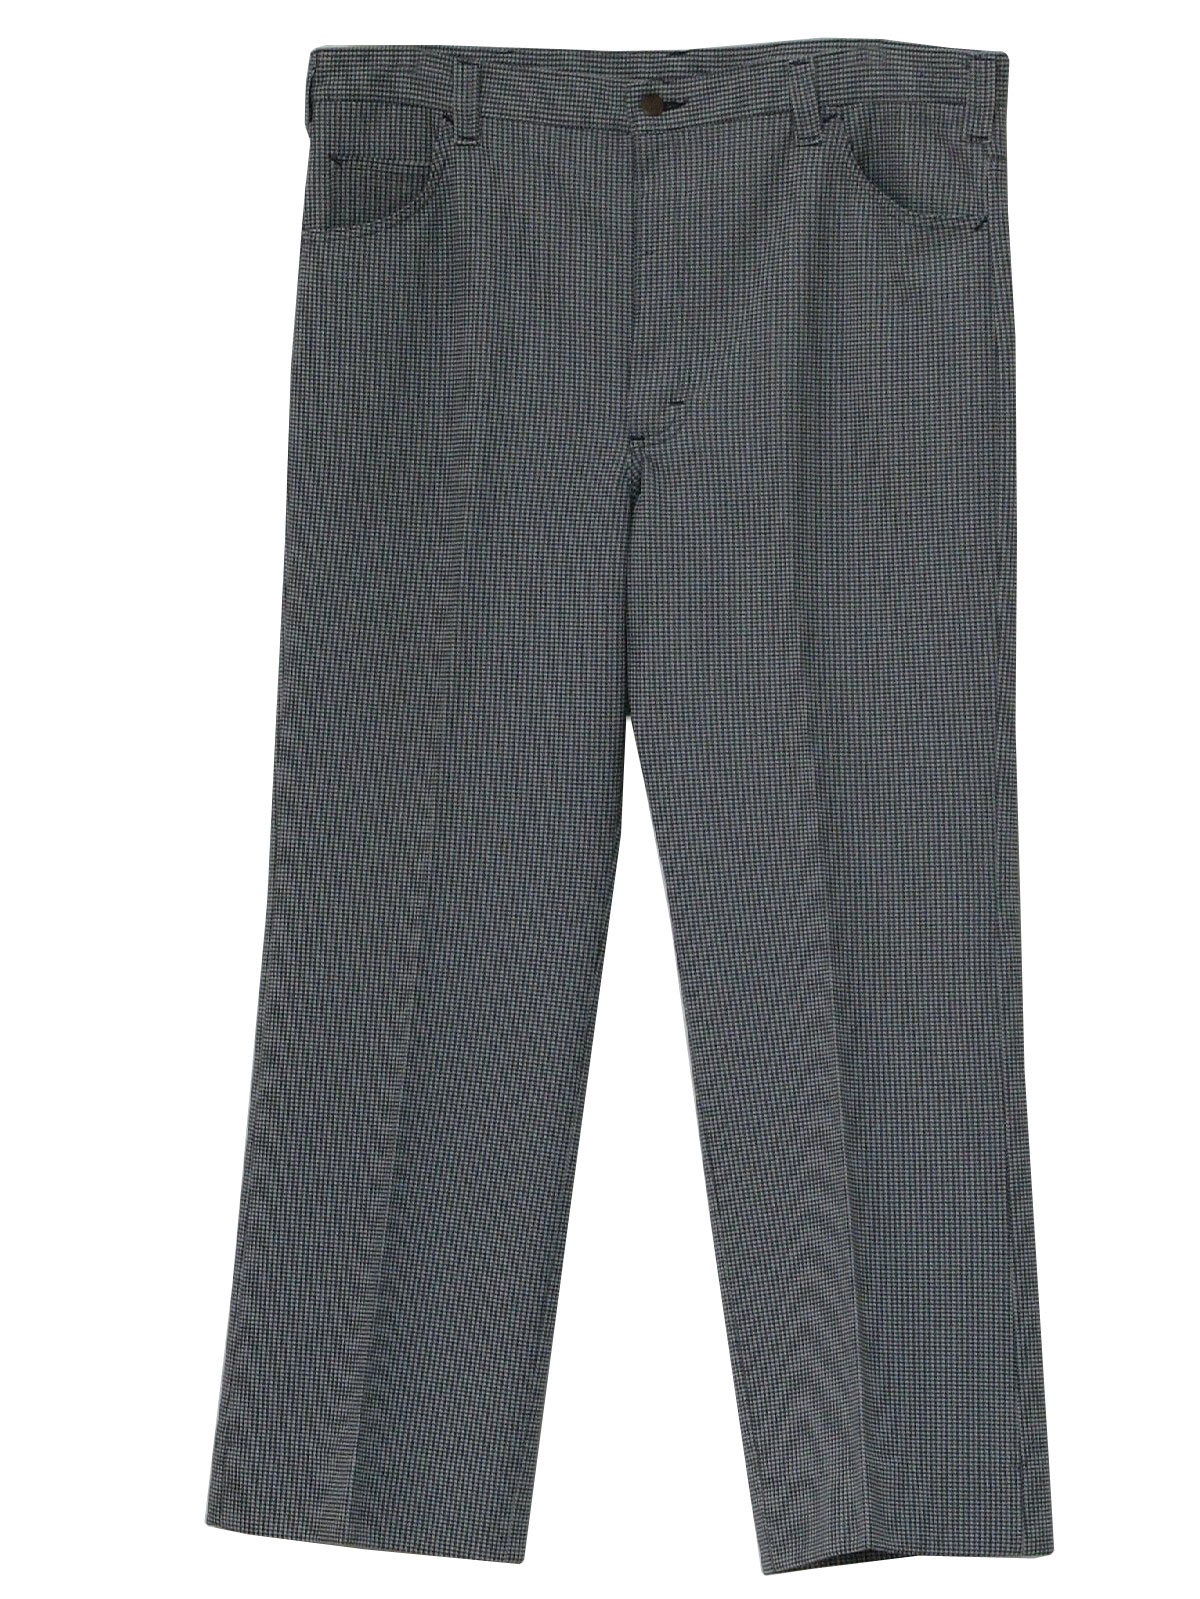 Vintage 70s Pants: Early 70s -Lee- Mens midnight blue and grey tight ...